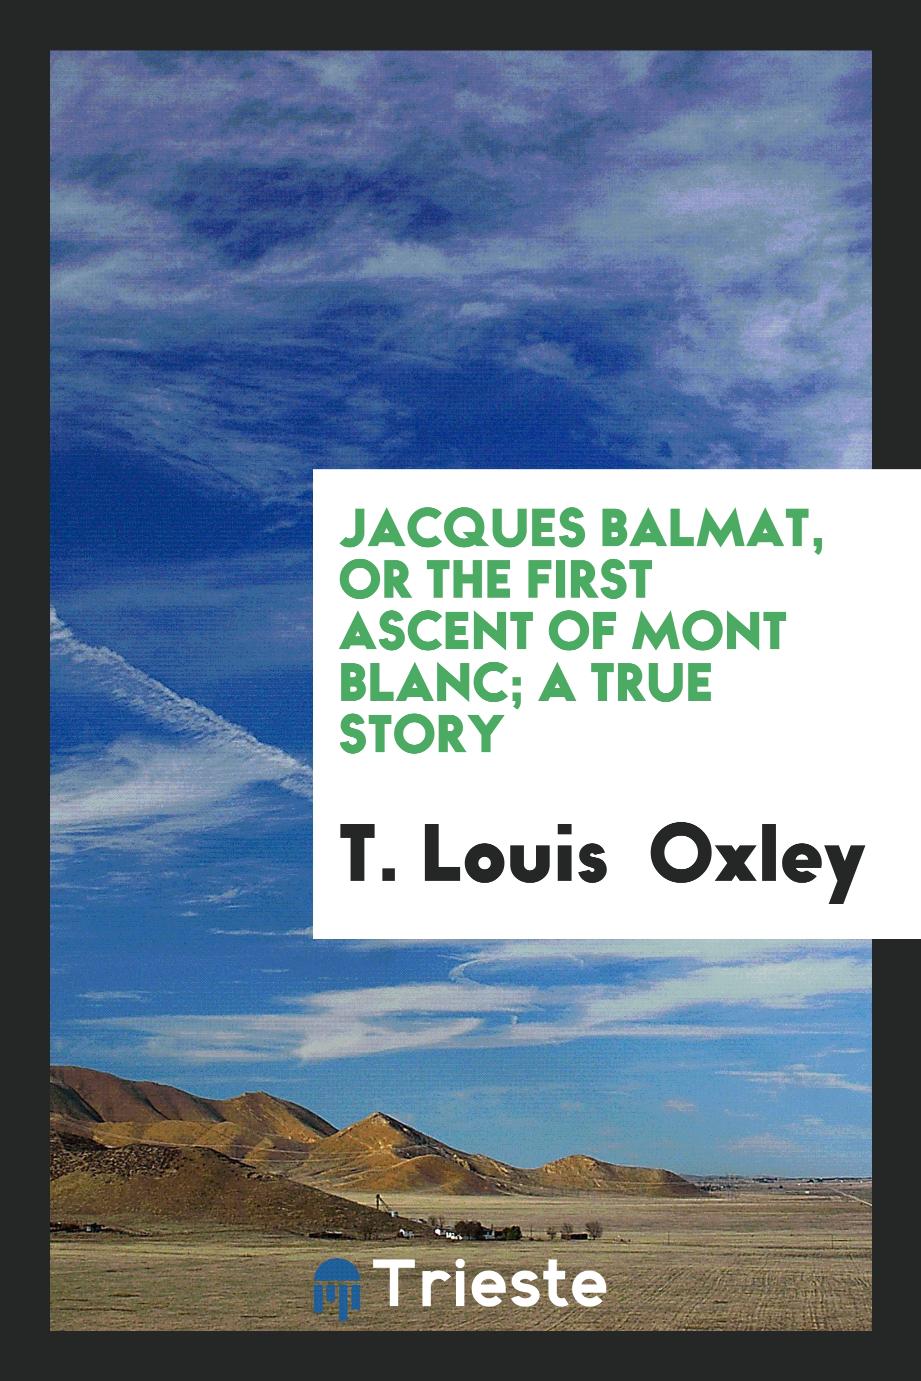 Jacques Balmat, or The first ascent of Mont Blanc; A True Story